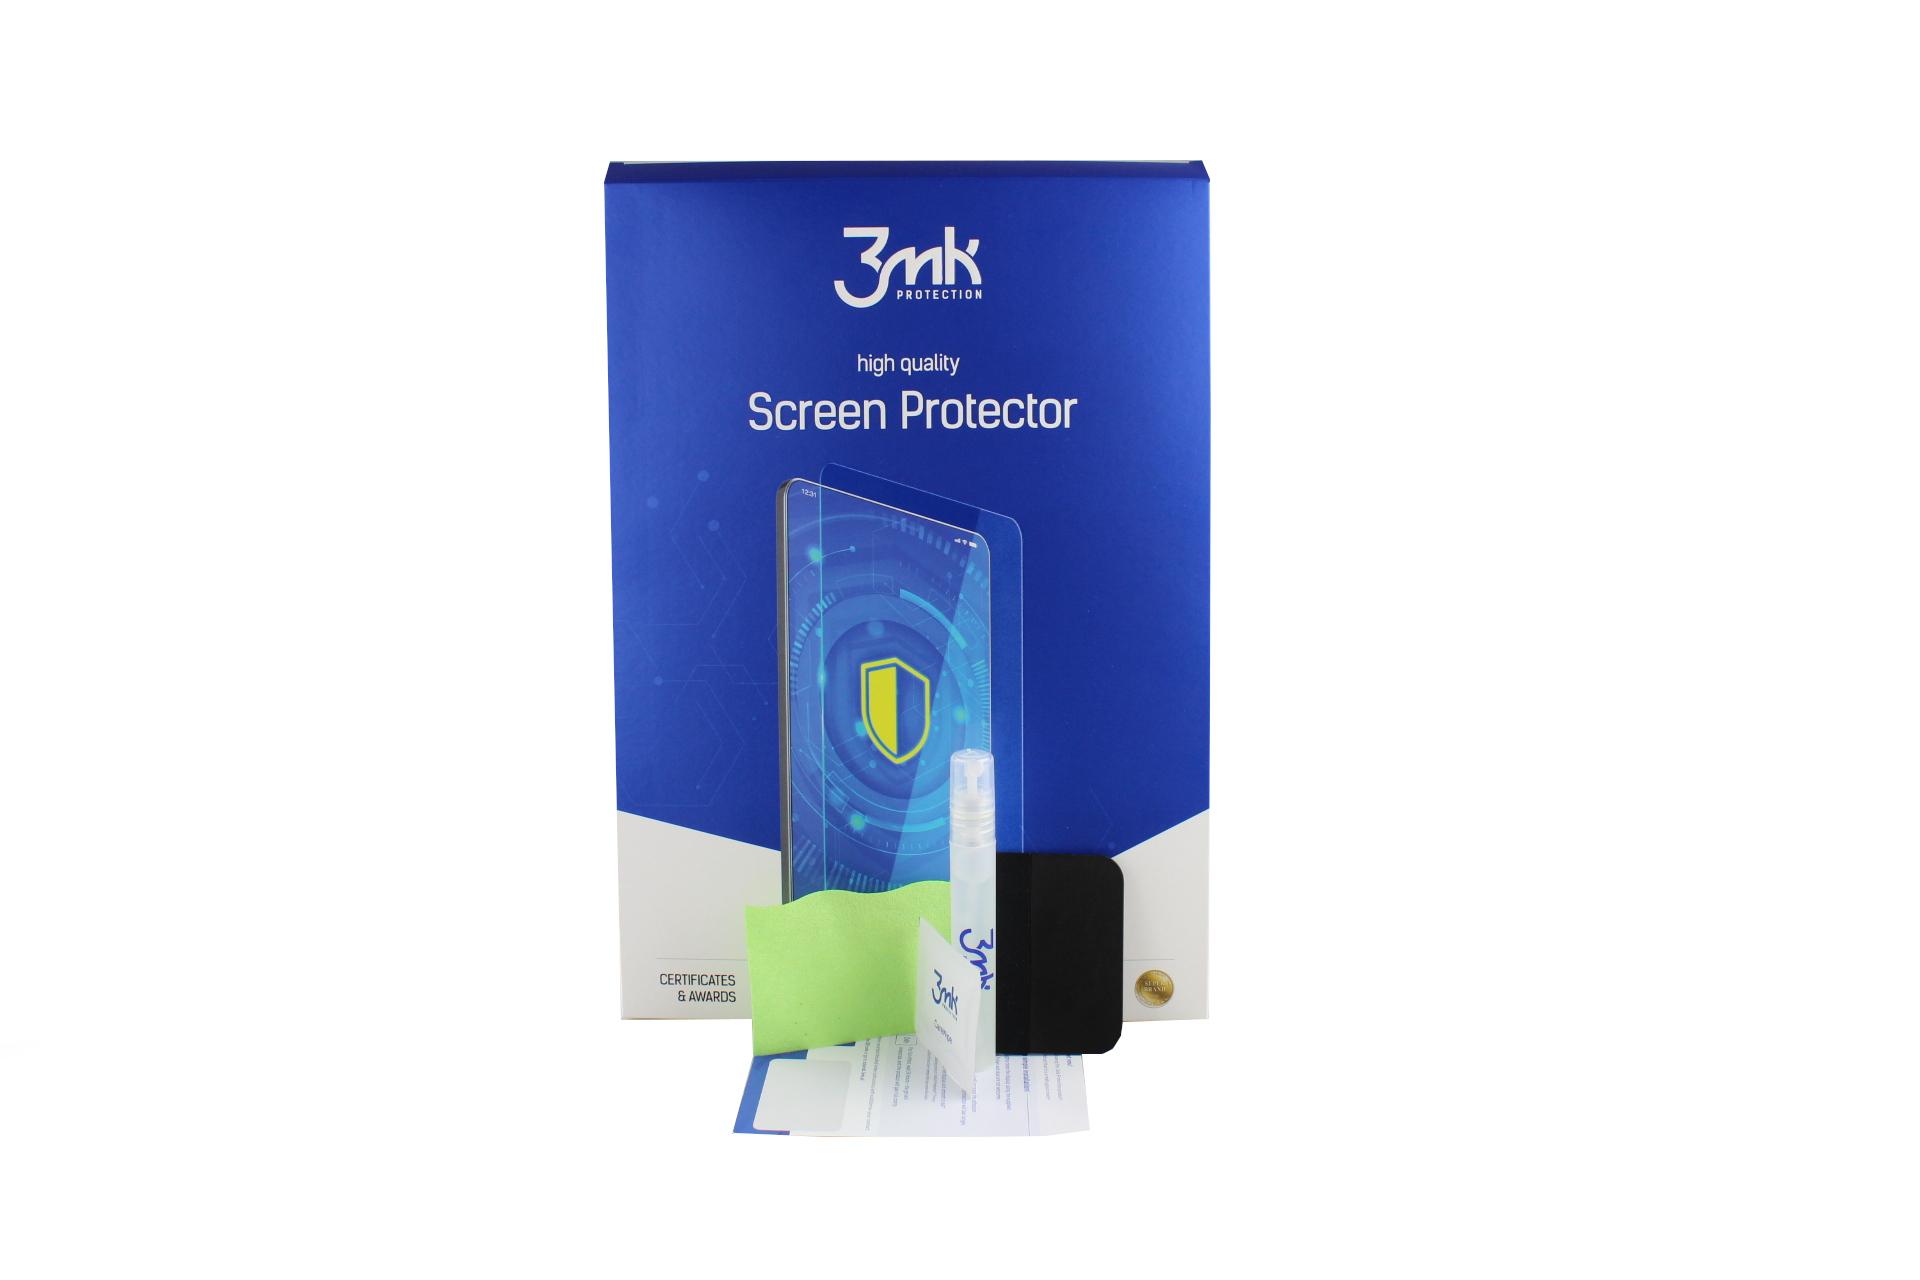 3mk Booster Screen Protector - shipping / transport packaging for cut 3MK All-Safe film.